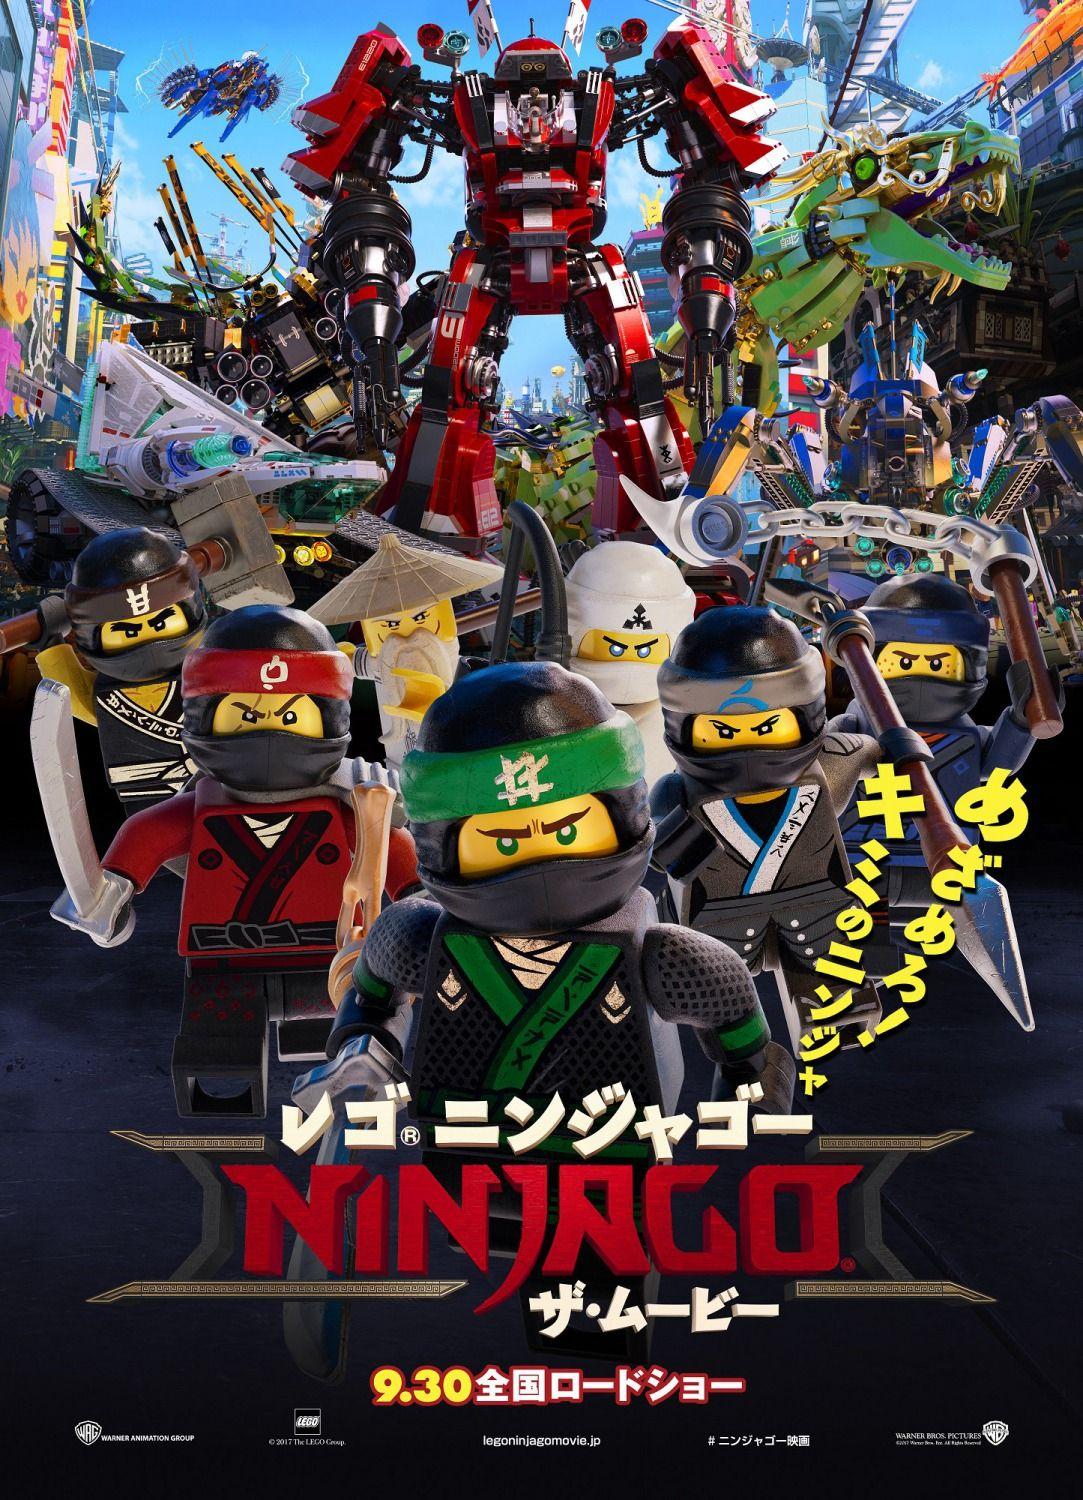 A New Series of Posters for The Lego Ninjago movie, Teaser Trailer